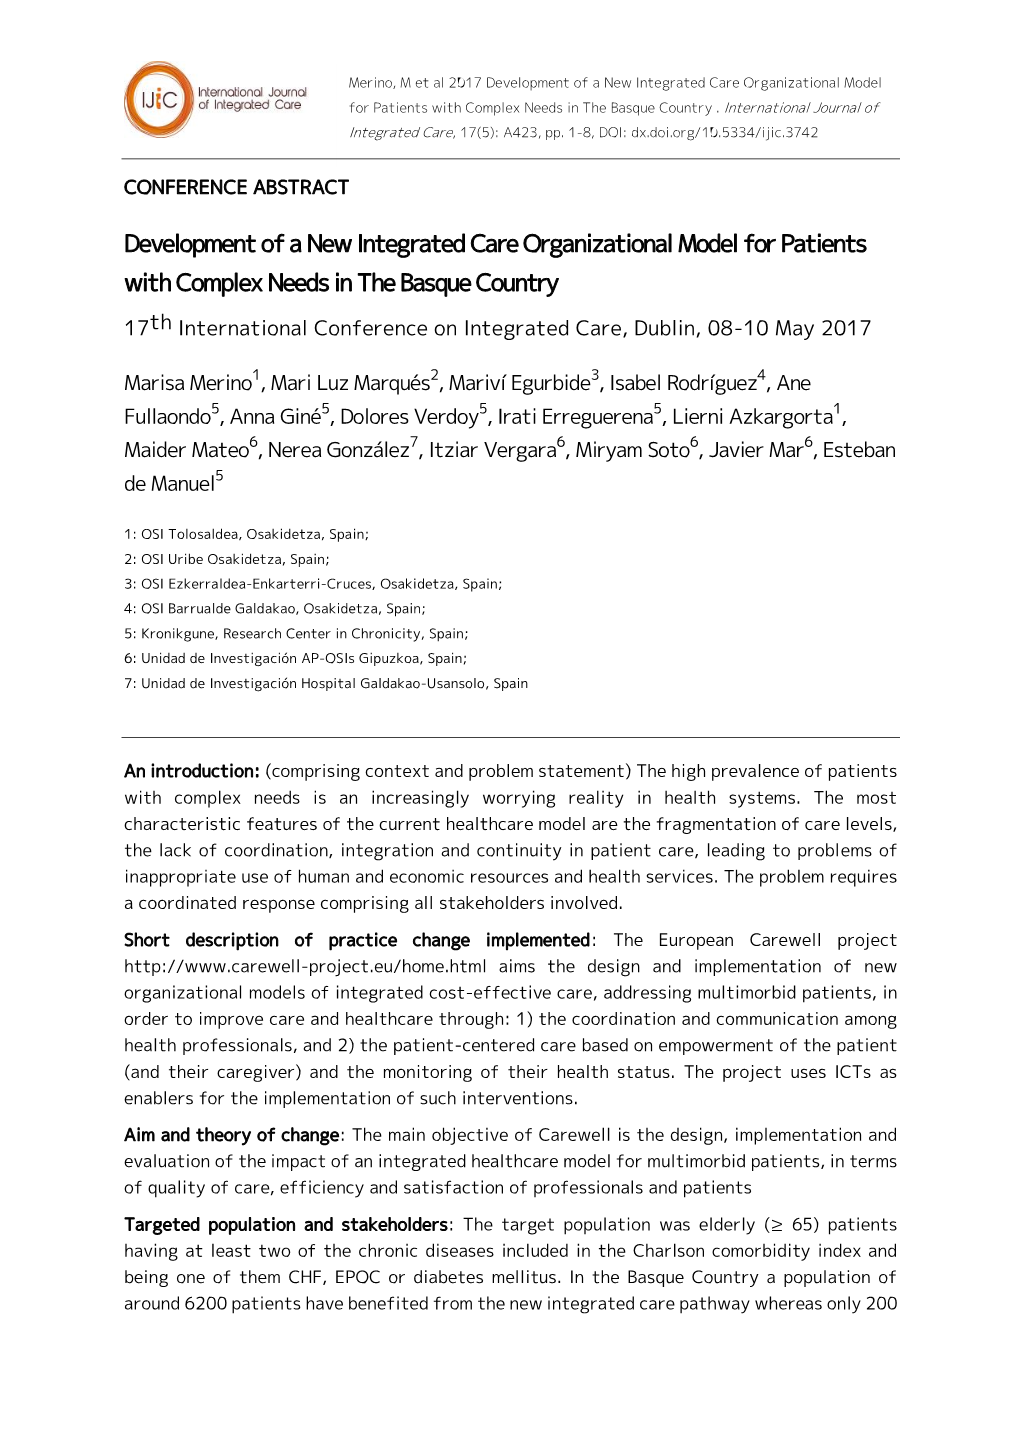 Development of a New Integrated Care Organizational Model for Patients with Complex Needs in the Basque Country